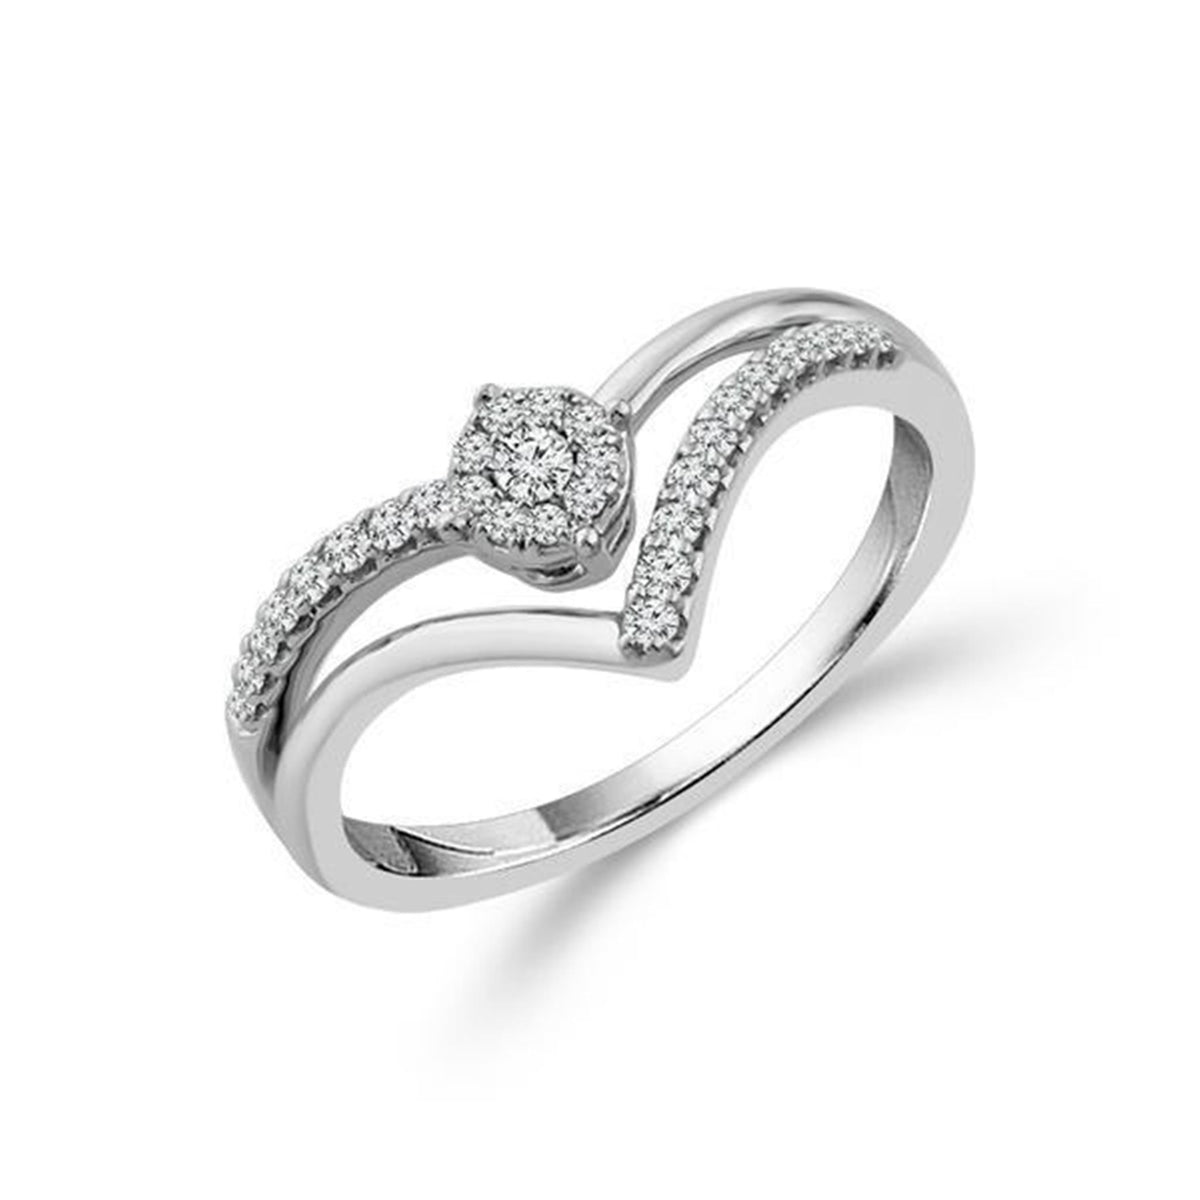 10Kt White Gold Contemporary Fashion Ring With 0.20cttw Natural Diamonds